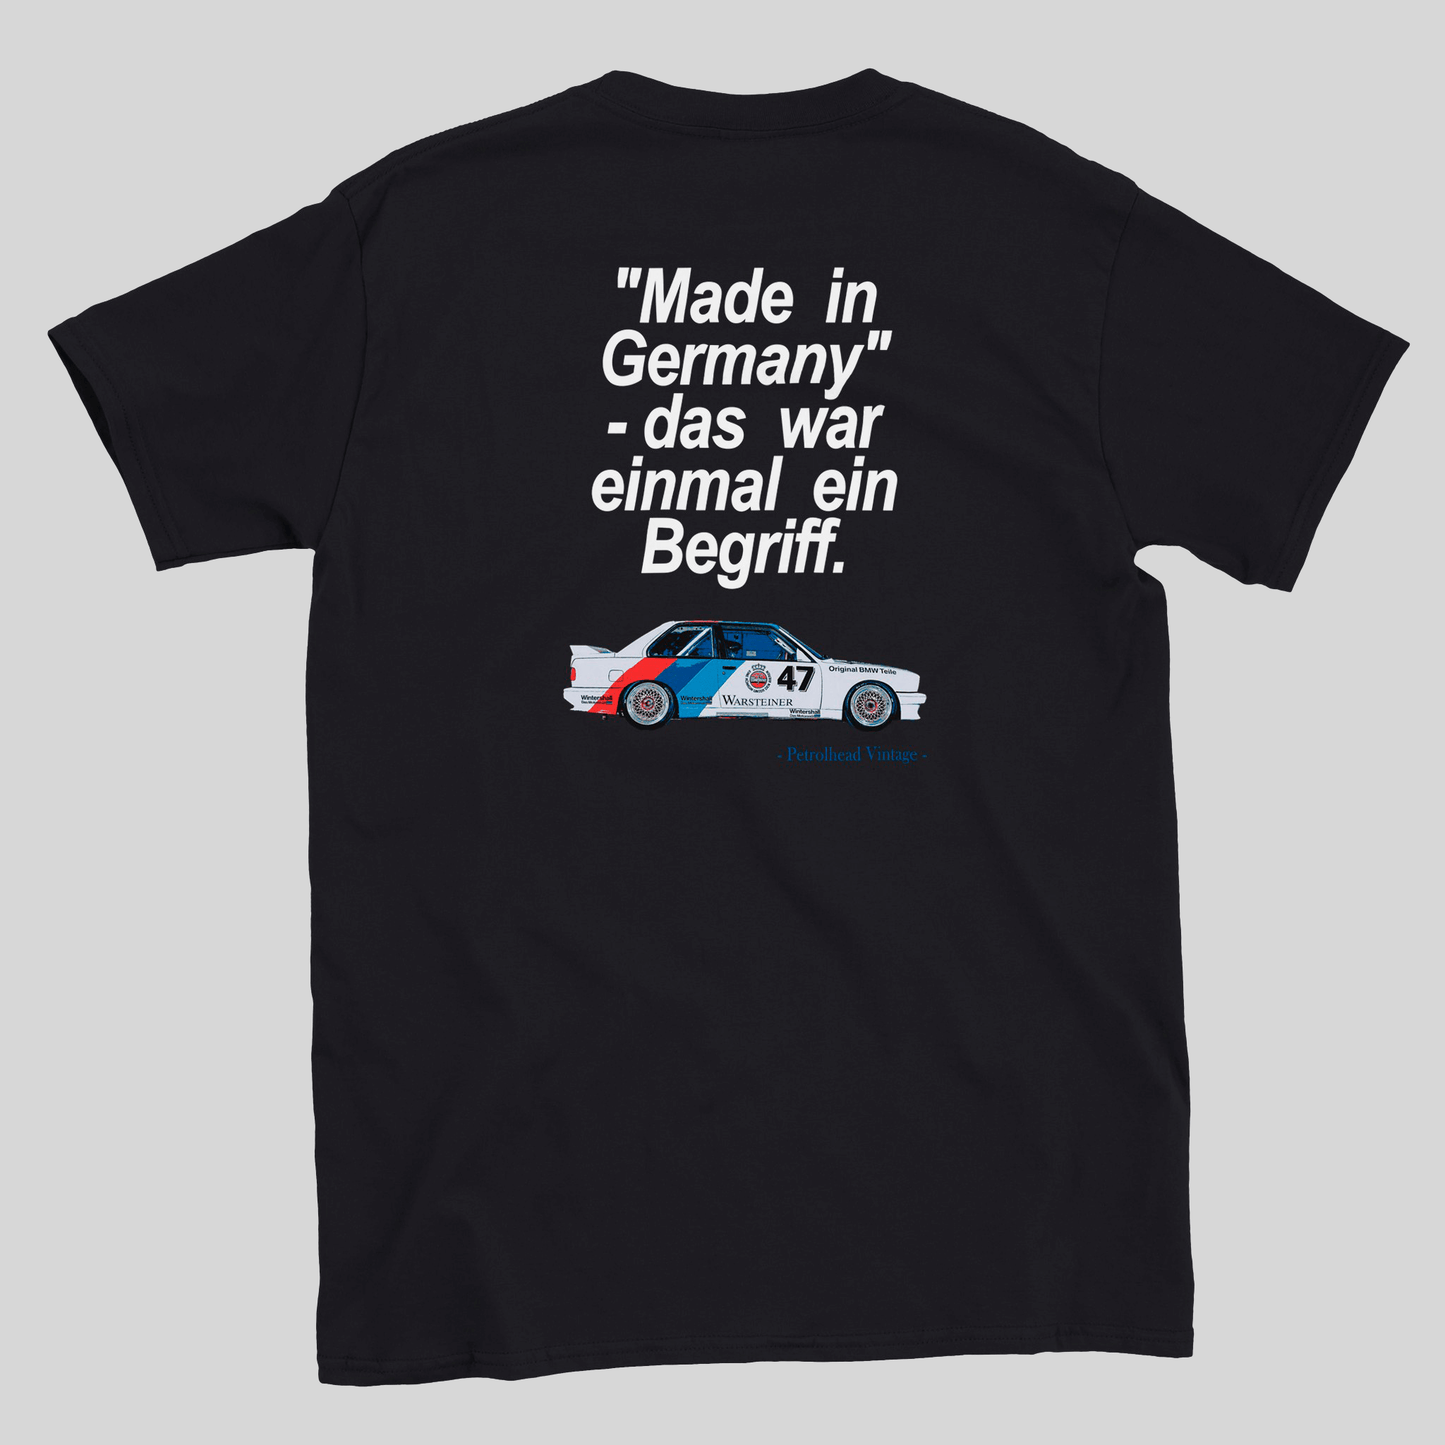 BMW M3 E30 DTM Classic Car T-Shirt - 'Made in Germany' Vintage Racing Tee black 